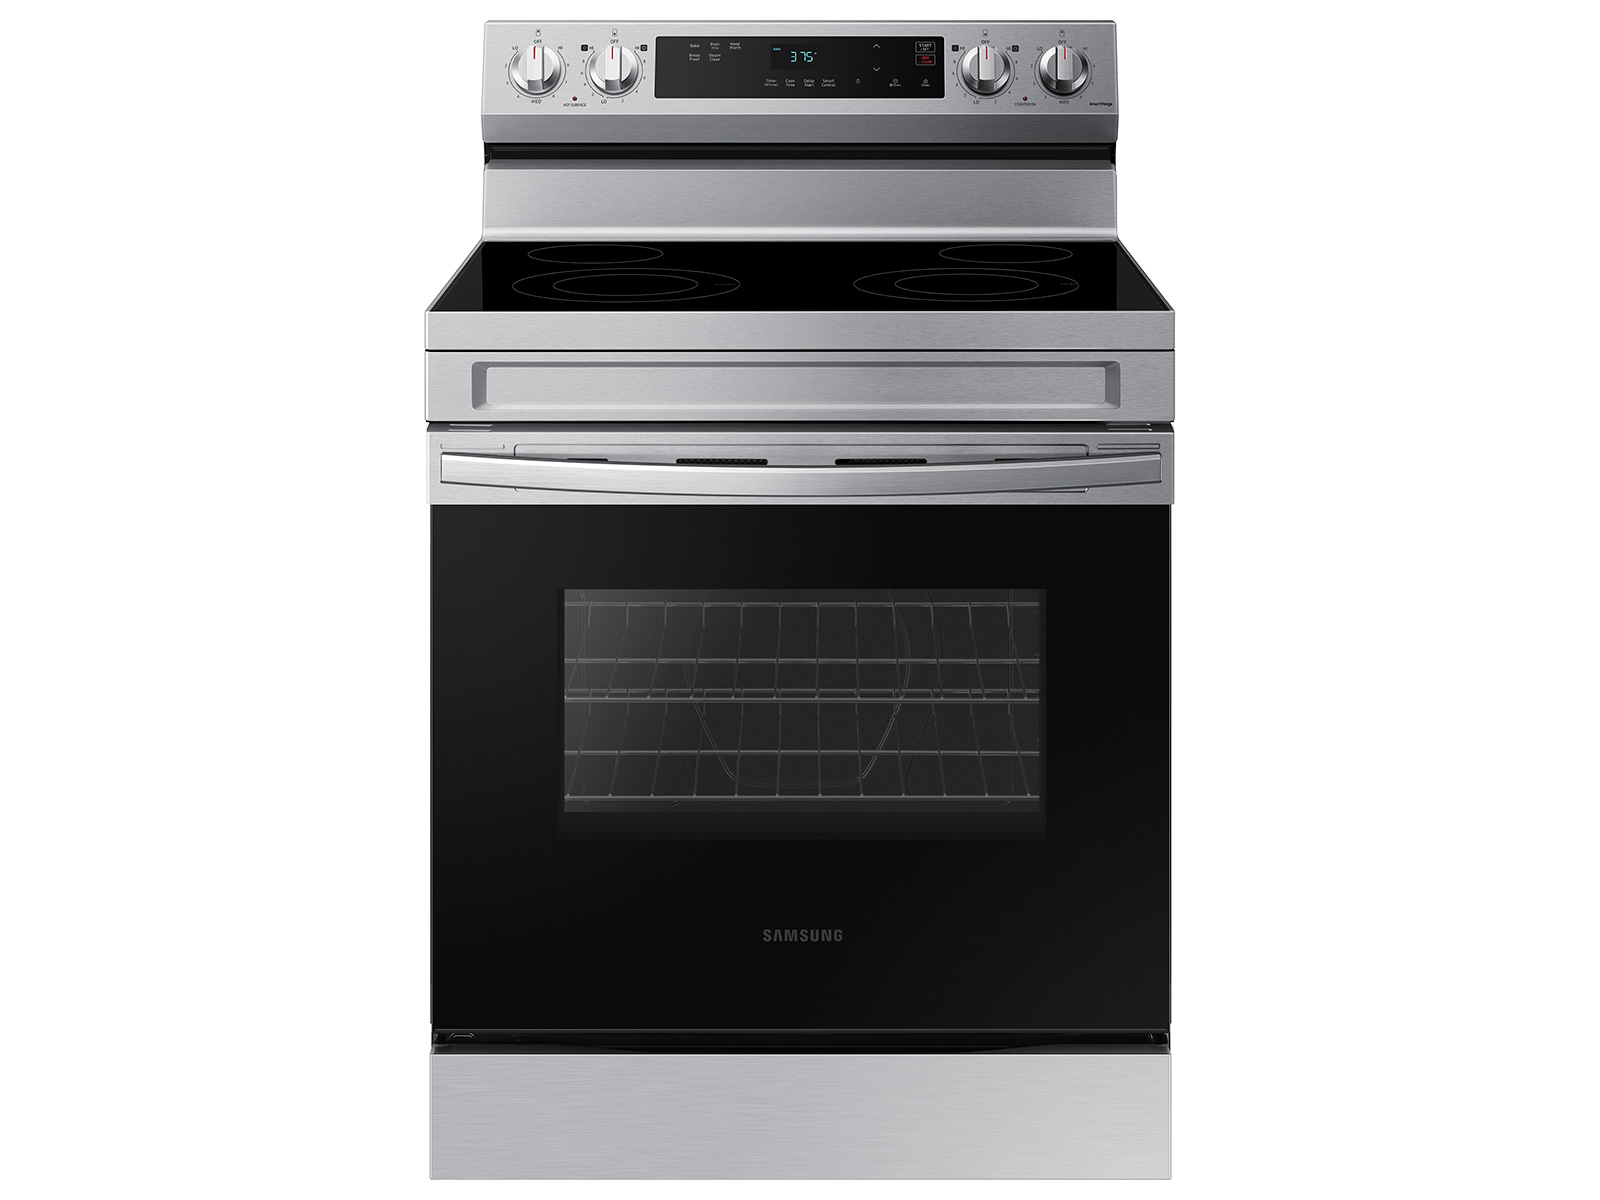 Photos - Cooker Samsung 6.3 cu. ft. Smart Freestanding Electric Range with Steam Clean in 